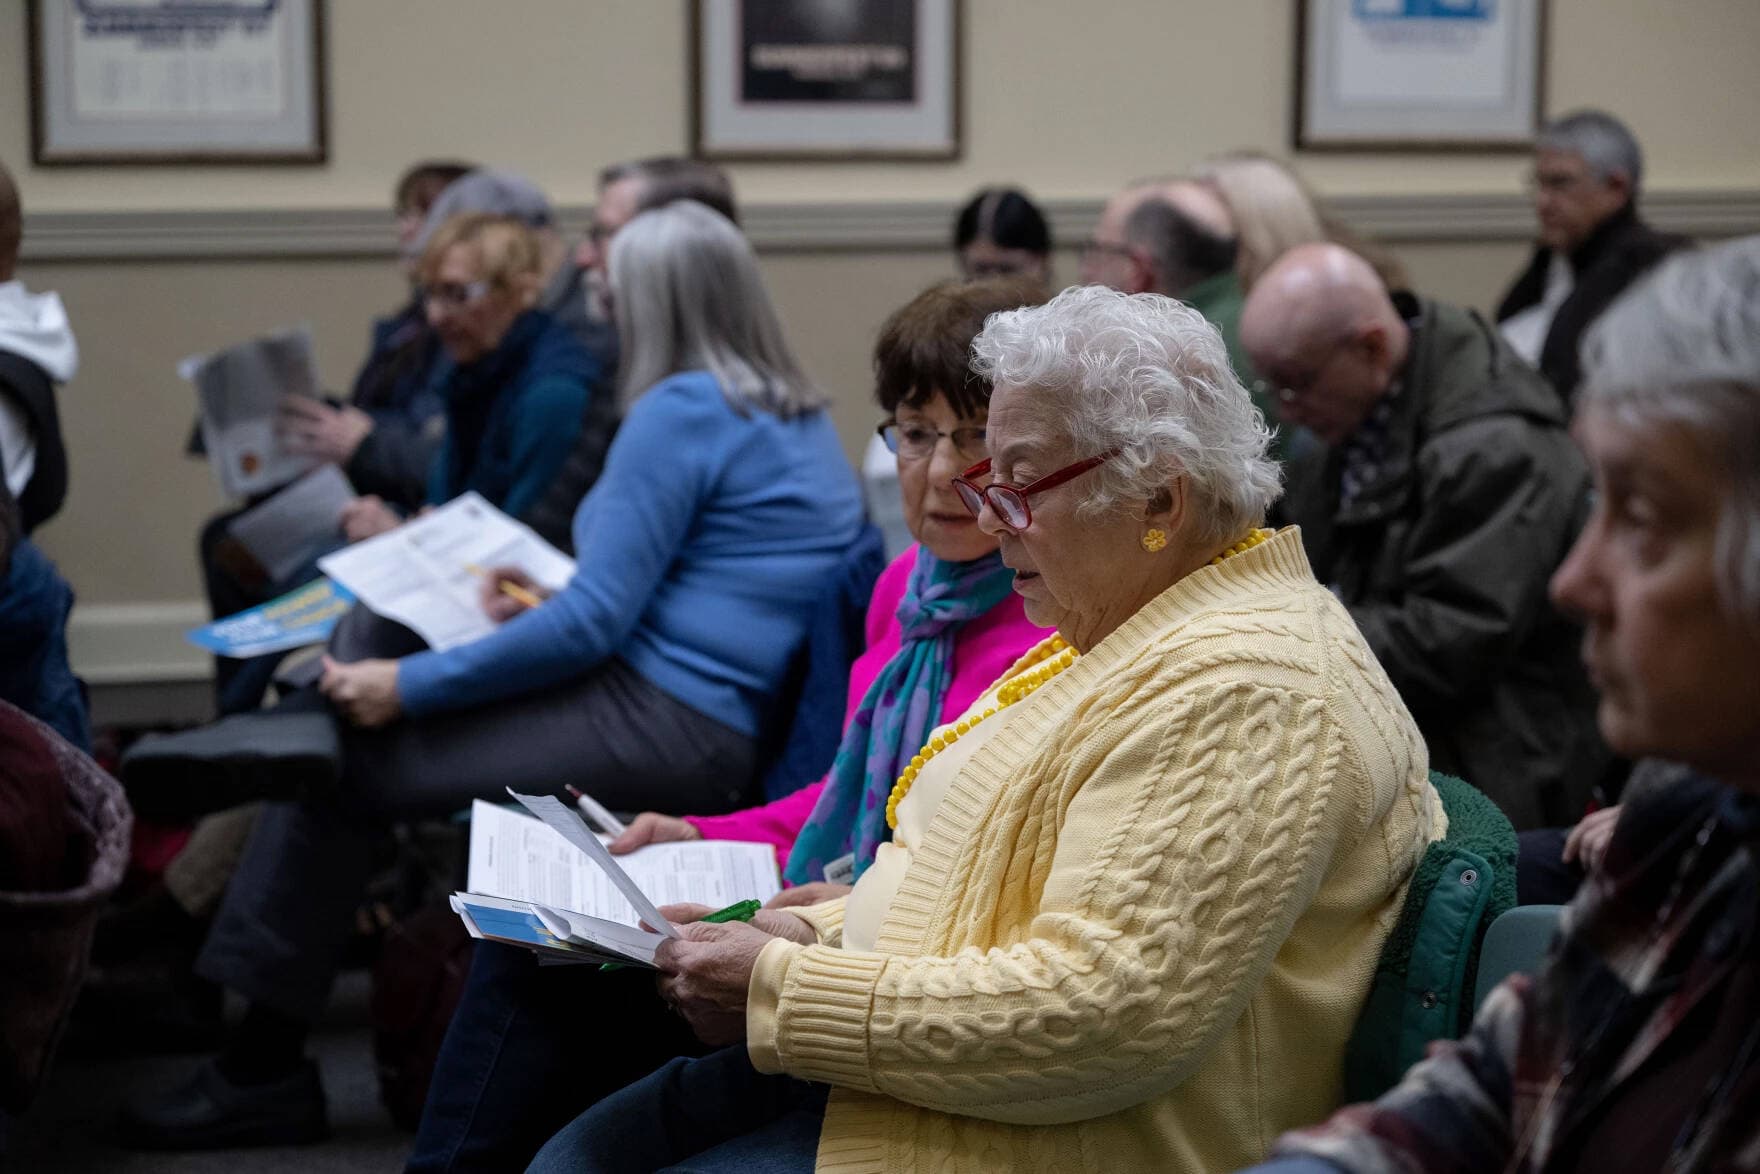 Nashua residents Pat Lyons, center right, and Irene Oliveira look at informational sheets on April 5, during a meeting about community power at City Hall in Nashua, N.H. (Raquel C. Zaldívar/New England News Collaborative)